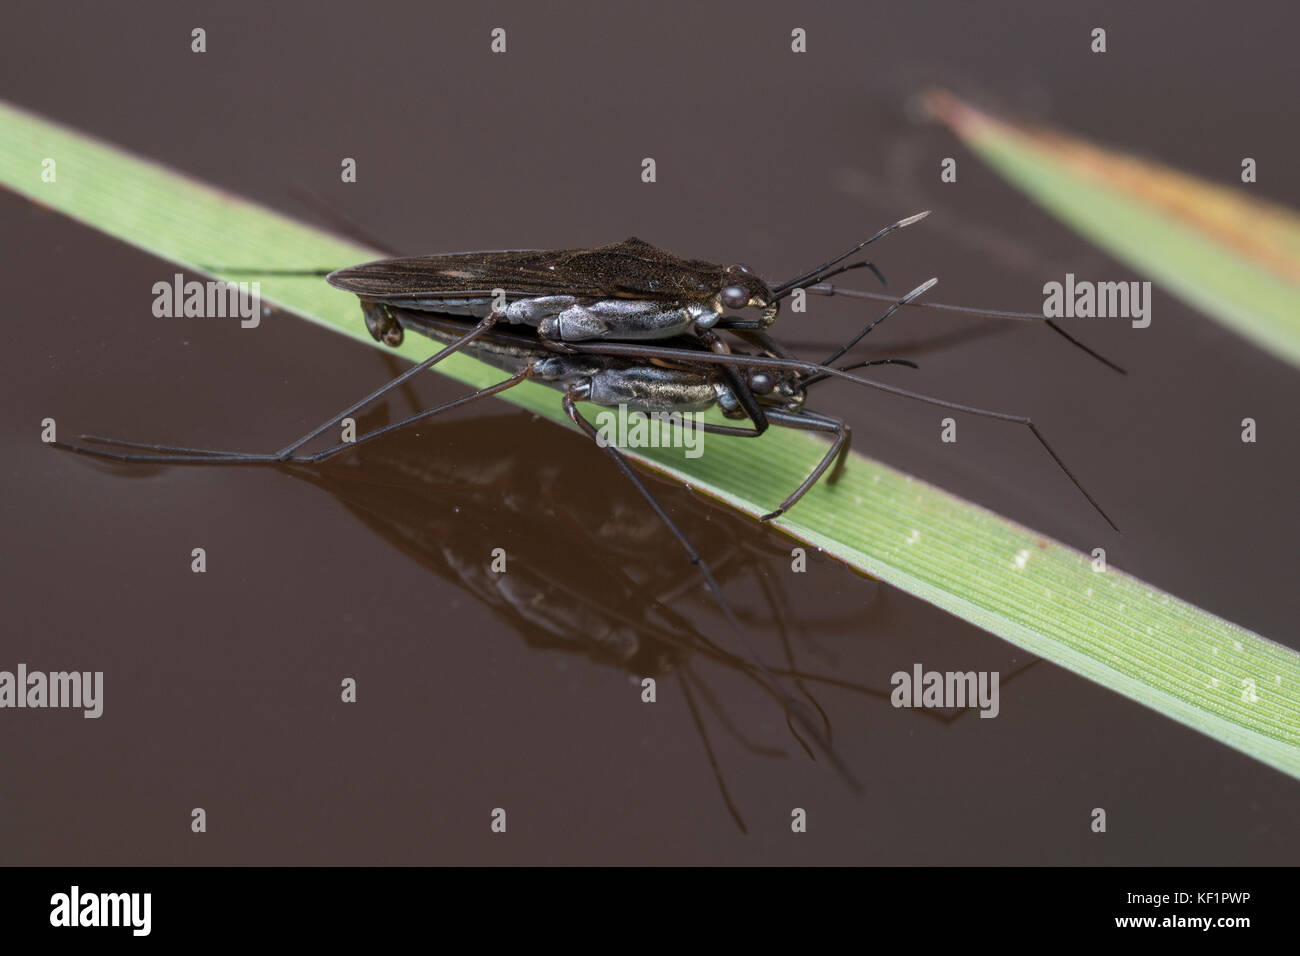 Mating Pondskaters on blade of grass in pool of water. Tipperary, Ireland Stock Photo